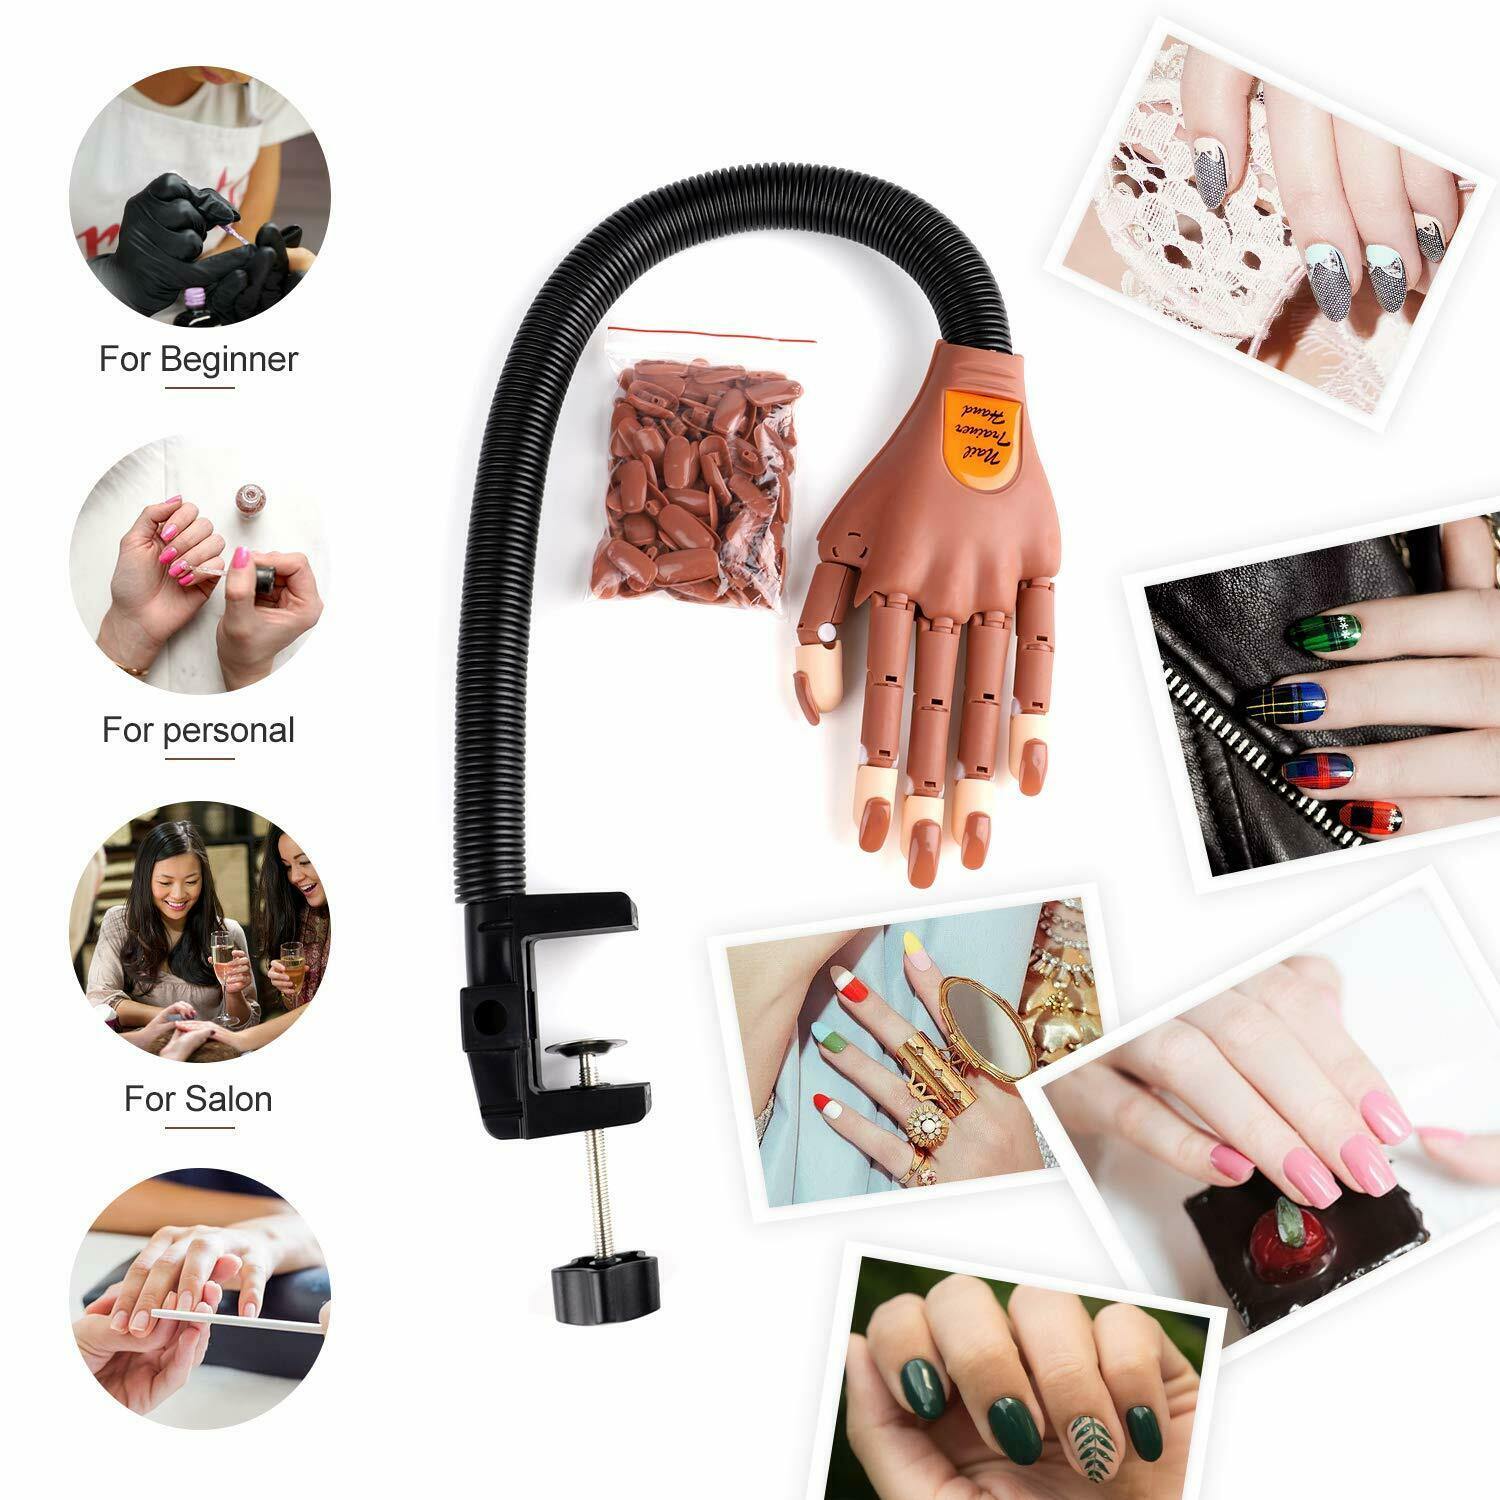 Free shiping Manicure Practice Includes 100 PCS of Nail piece DIY printing practice tools for the best manicure